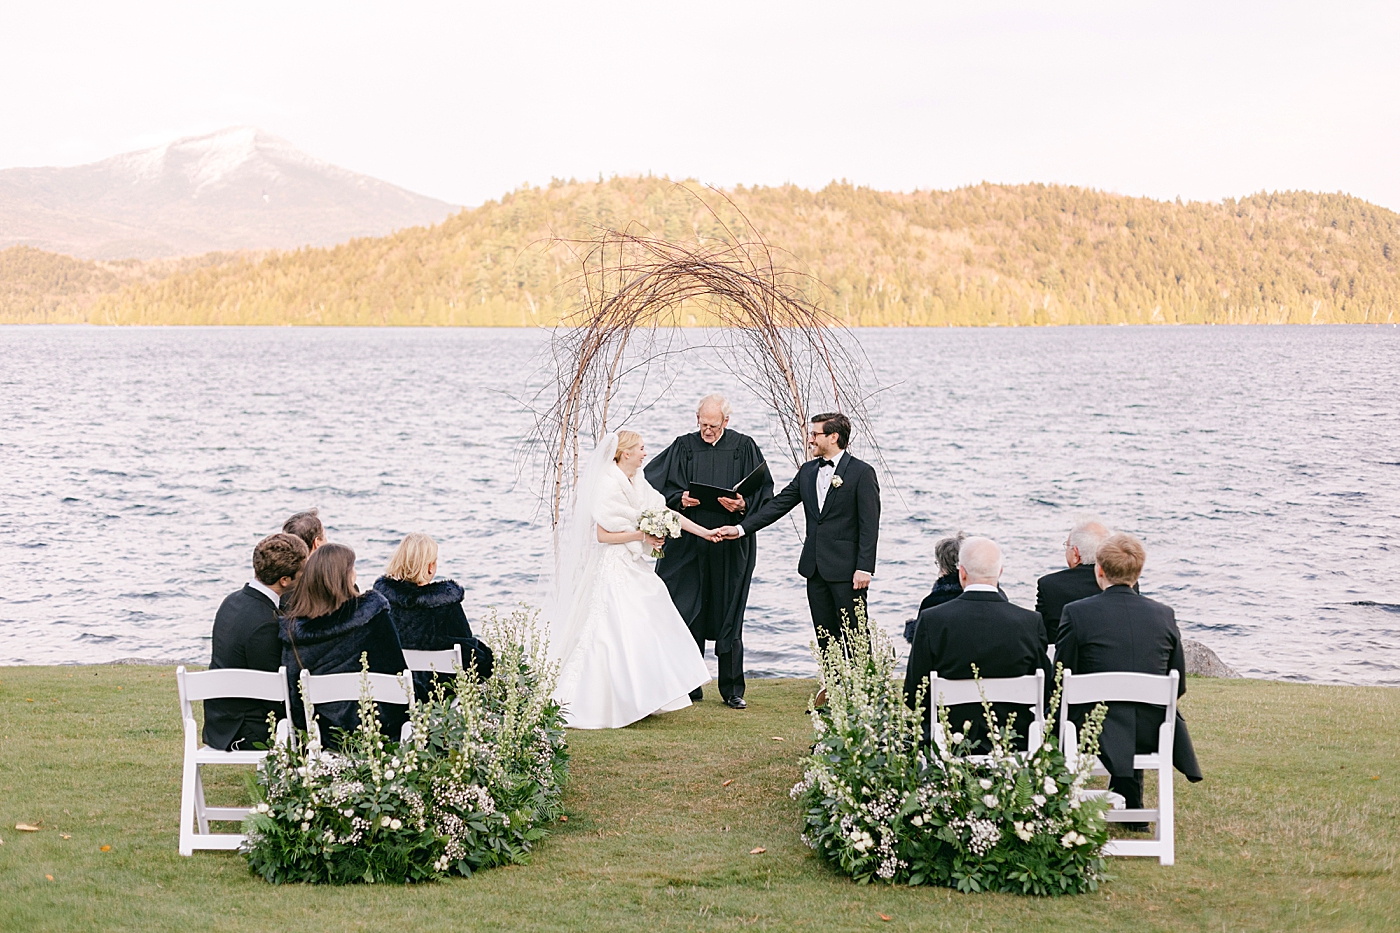 Intimate wedding ceremony on Lake Placid | Image by Hope Helmuth Photography